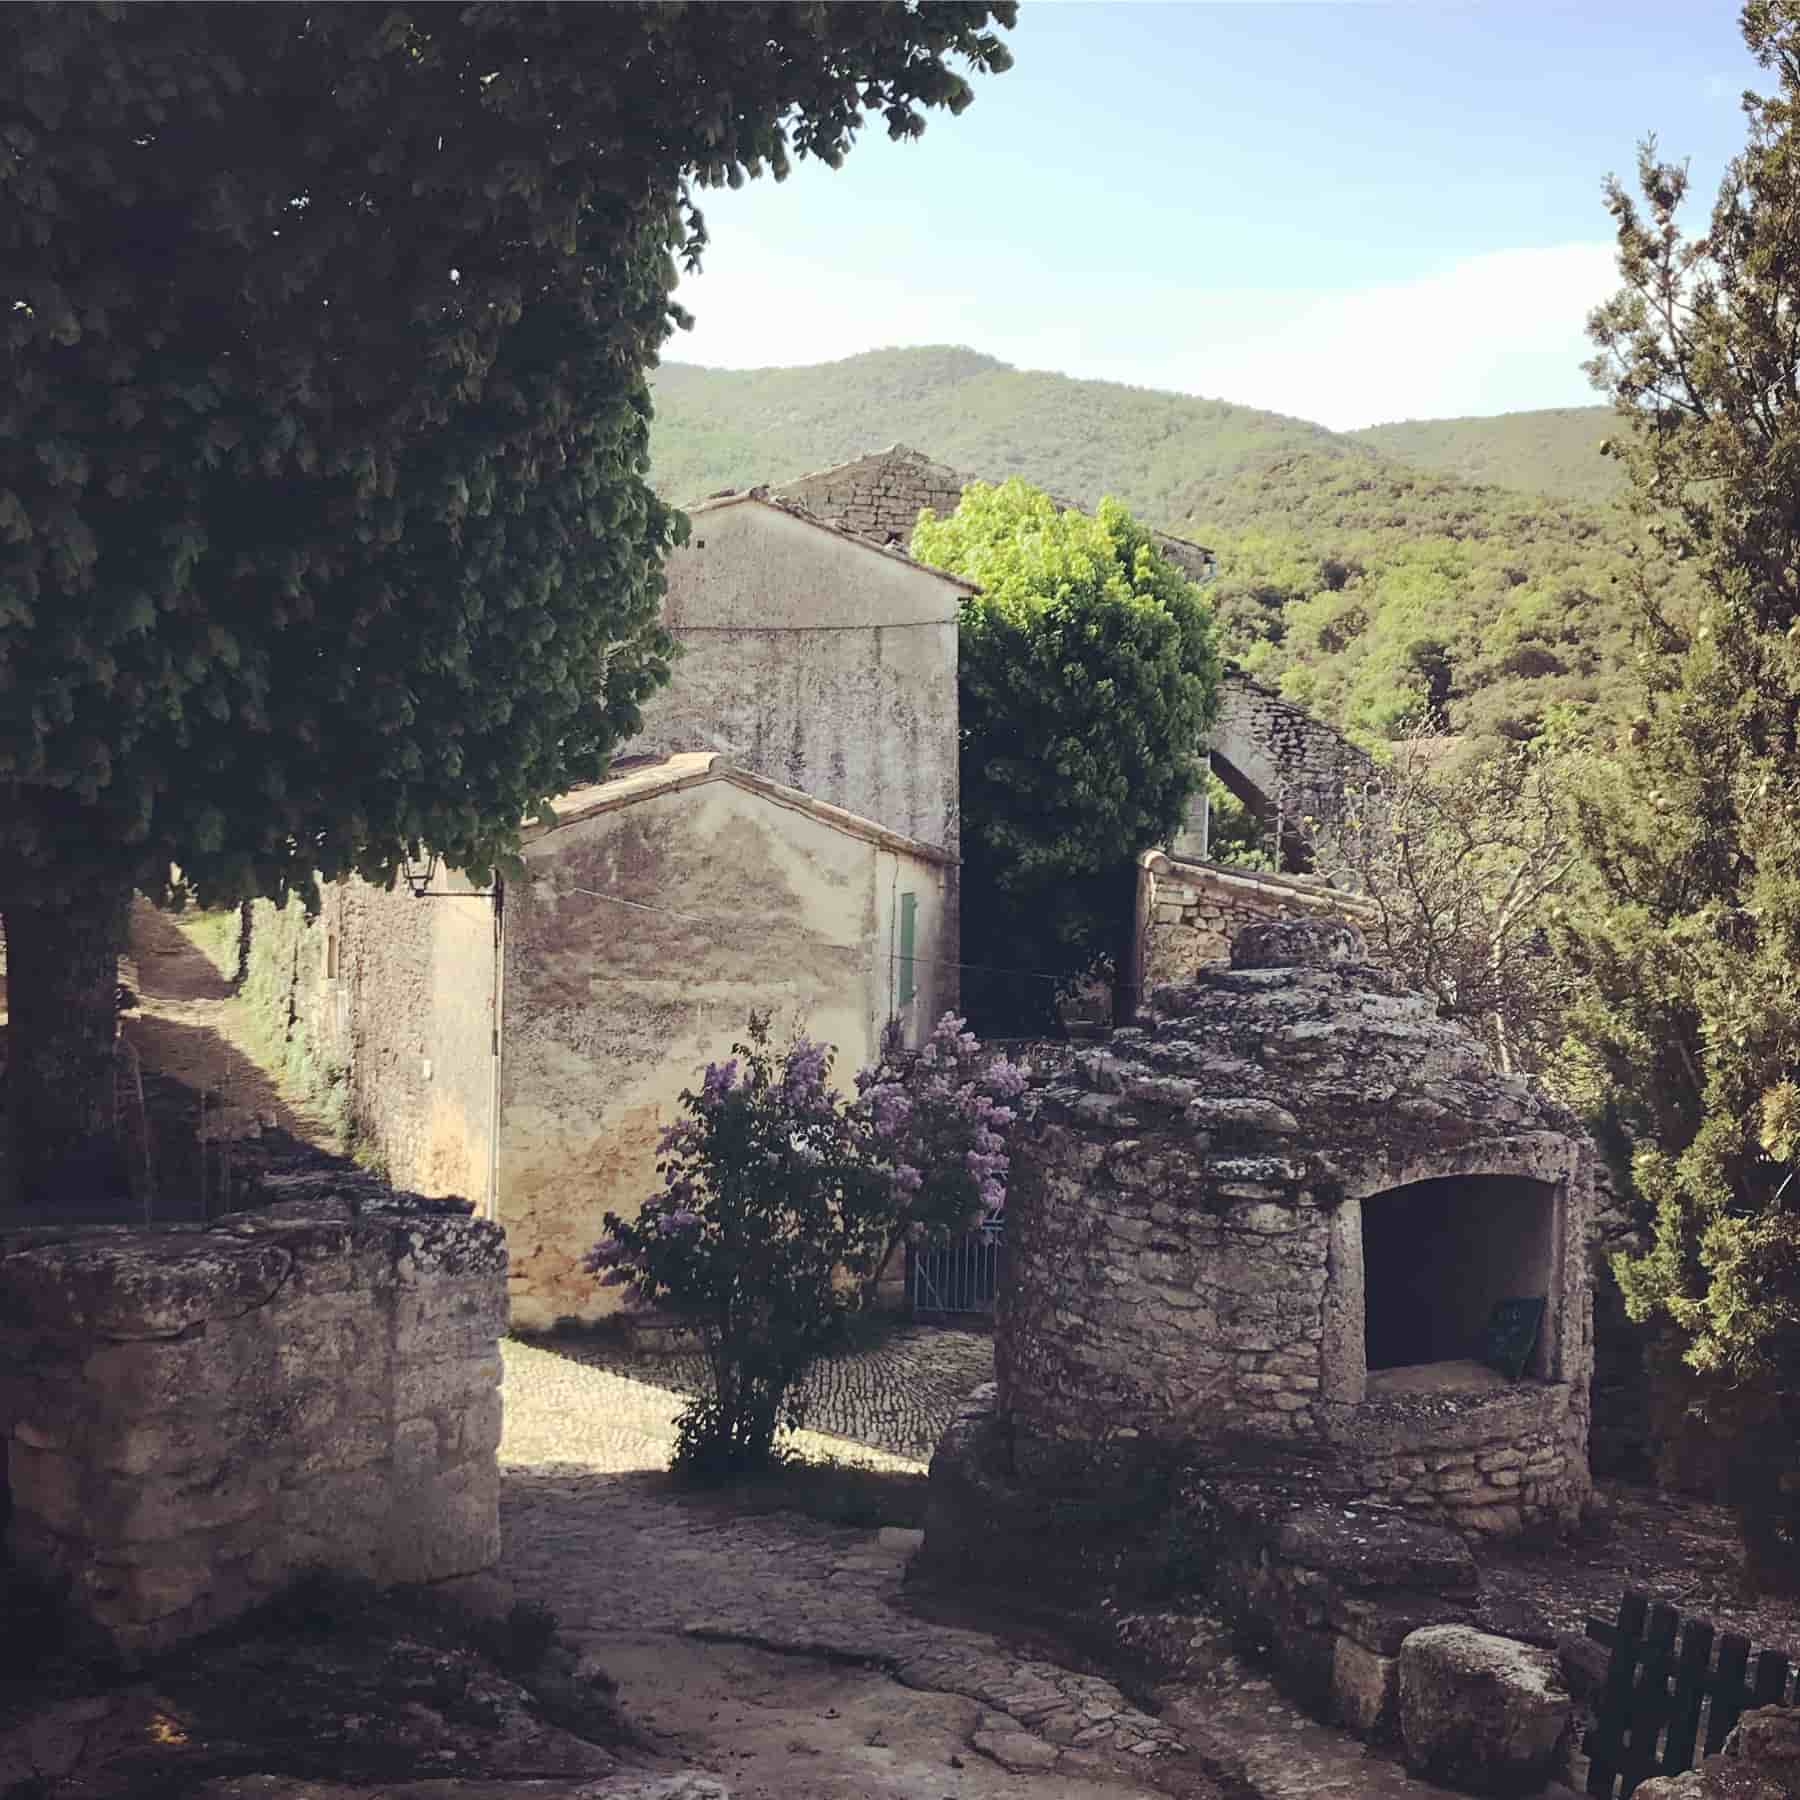 Sivergues village in the Luberon